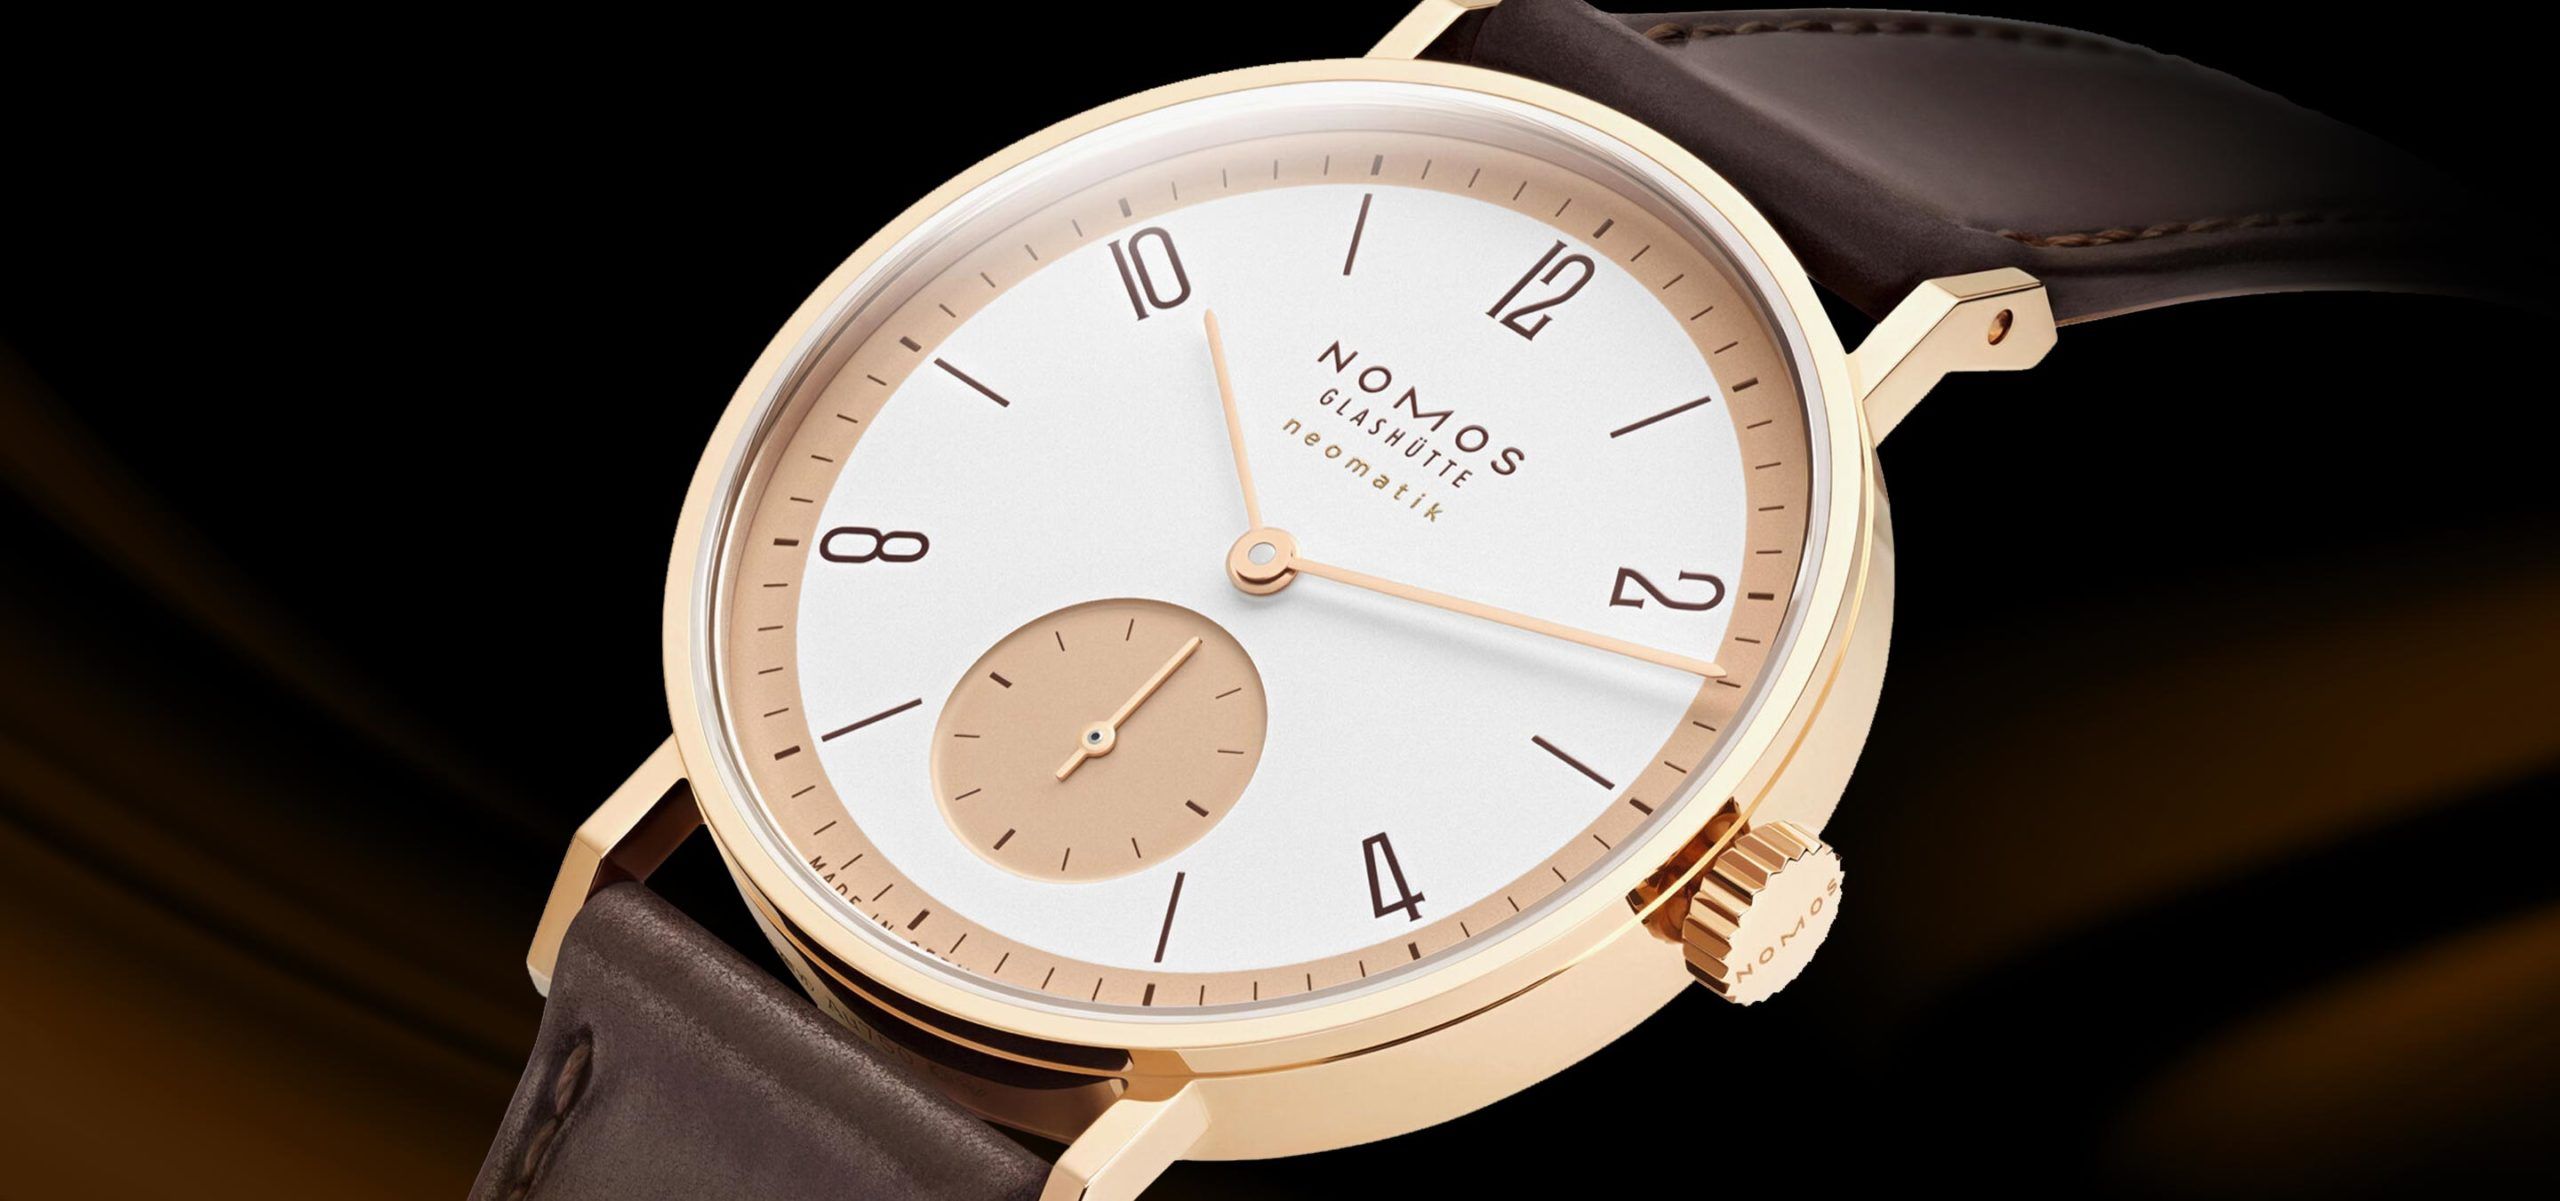 The Nomos Tangente Rose Gold Neomatik—Worth Its Weight In Gold